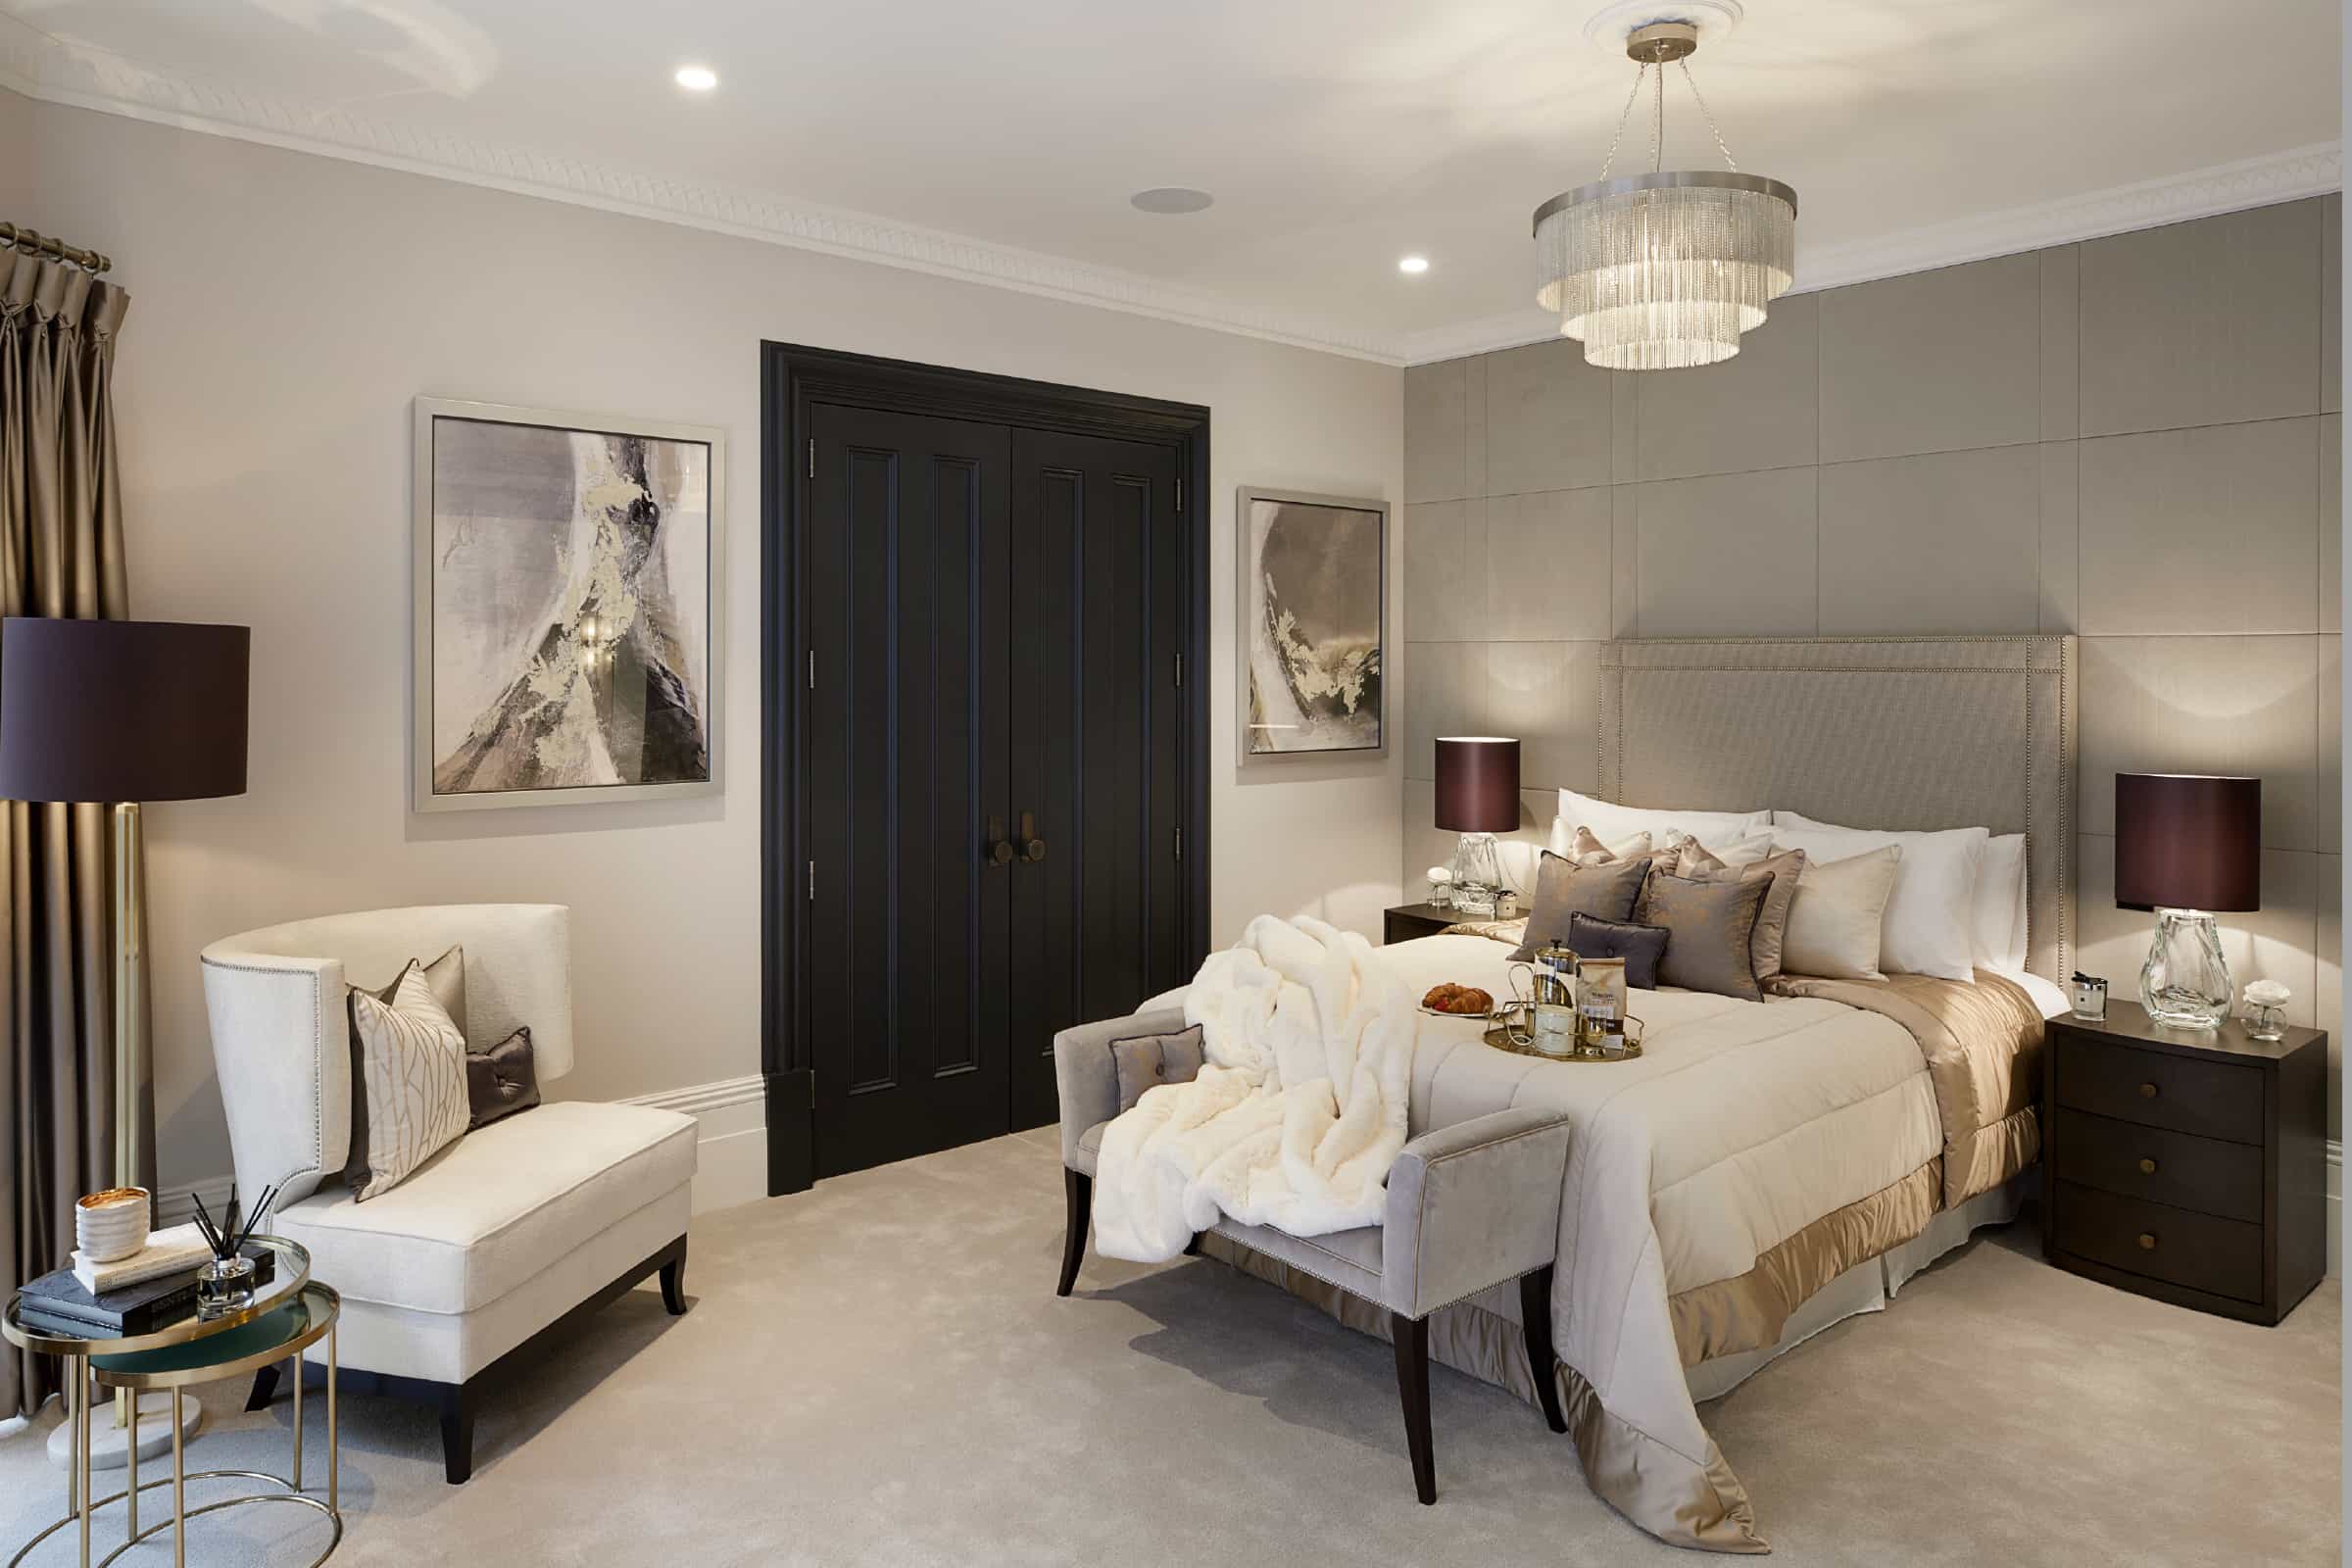 Luxury residential interior design with Intérieur London